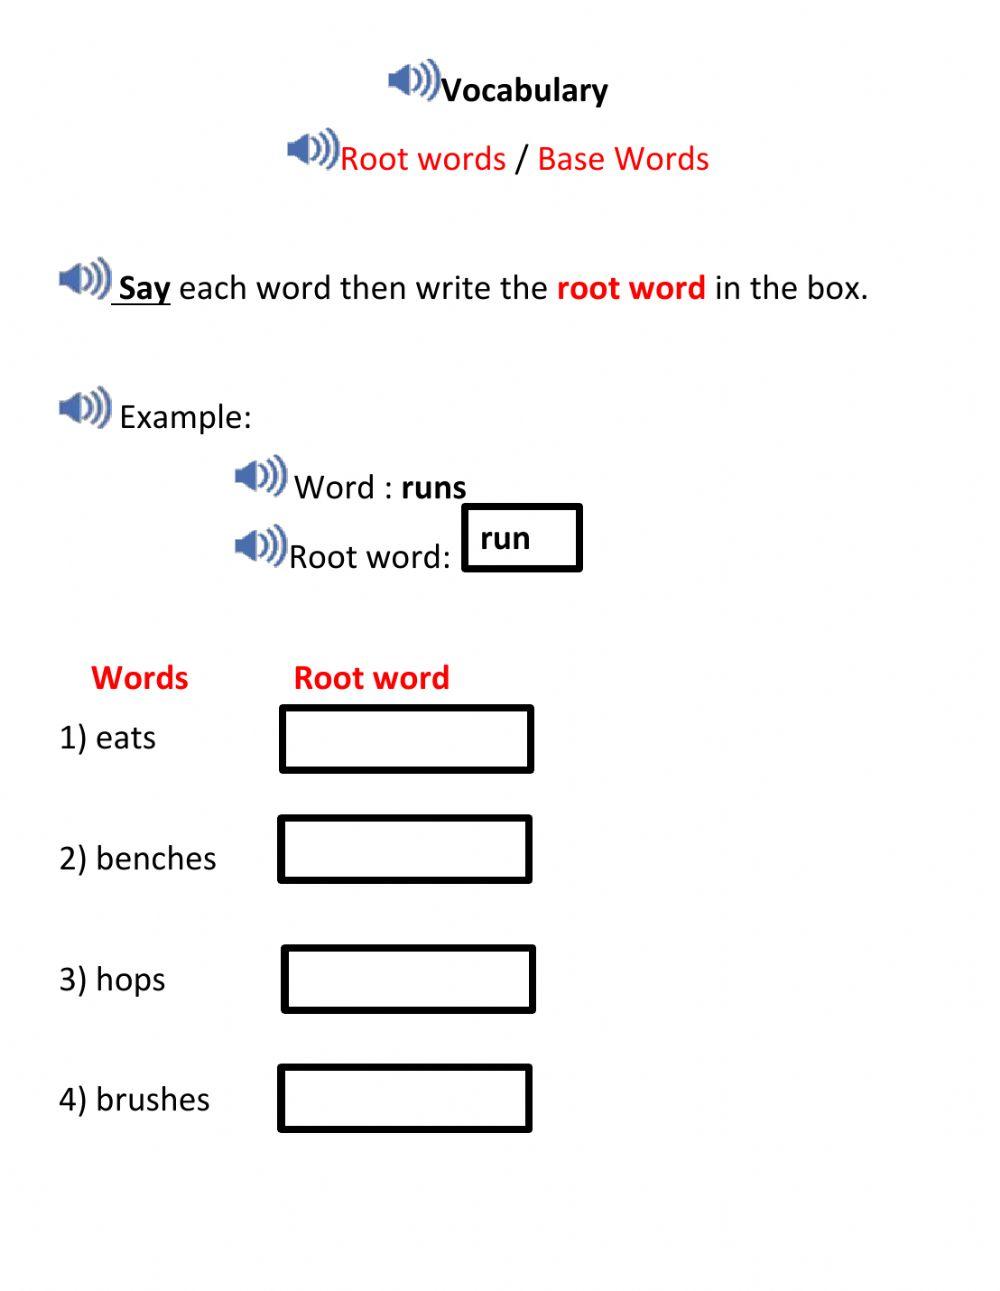 Root words - Base words